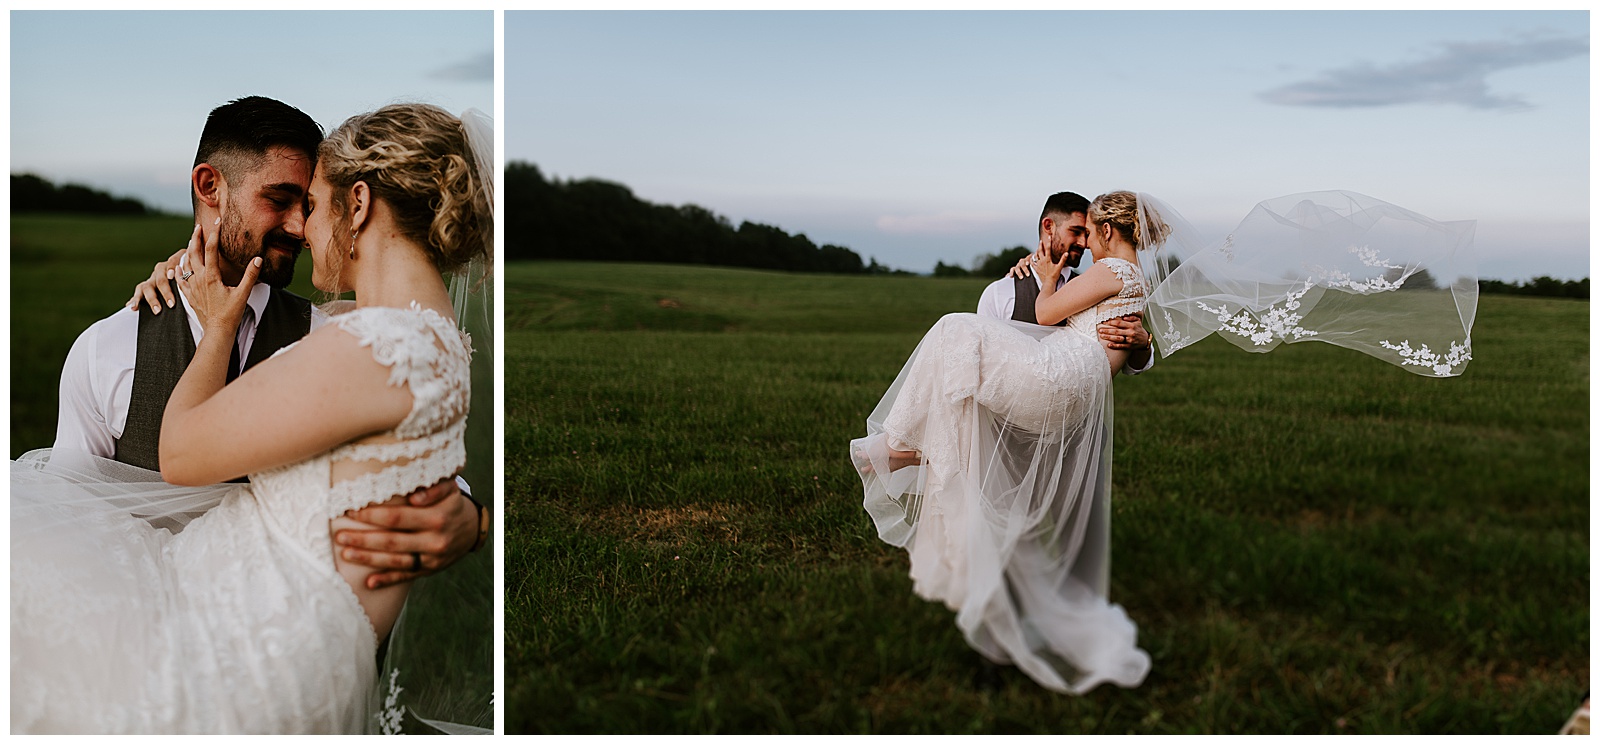 romantic and intimate wedding pictures, pride and prejudice wedding, emotional wedding, emotional bride and groom, sunset wedding photos, groom carrying bride, veil in the wind, long veil